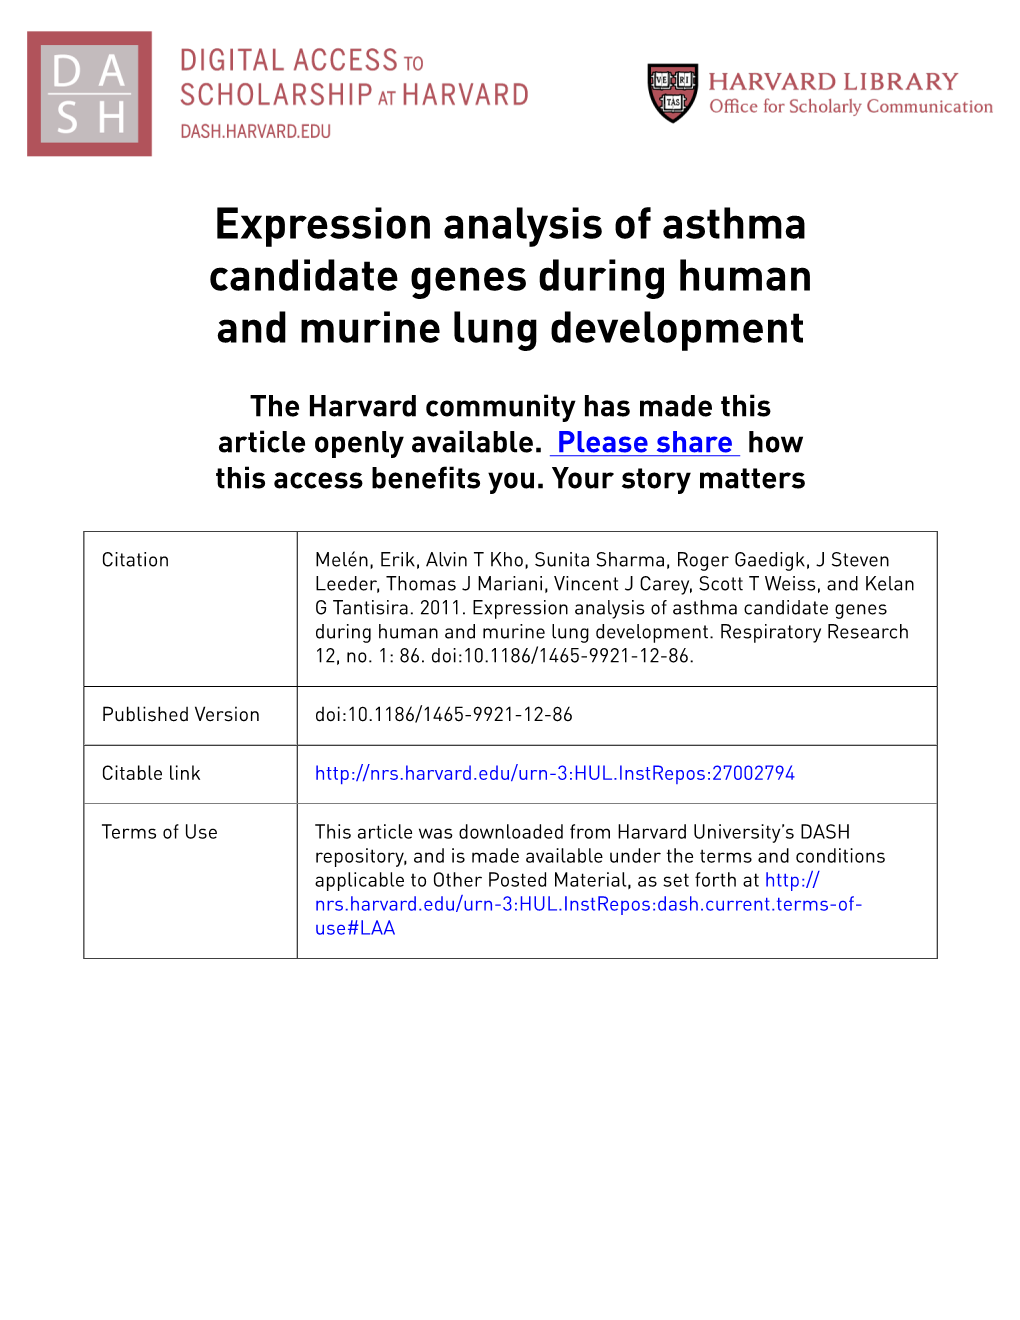 Expression Analysis of Asthma Candidate Genes During Human and Murine Lung Development